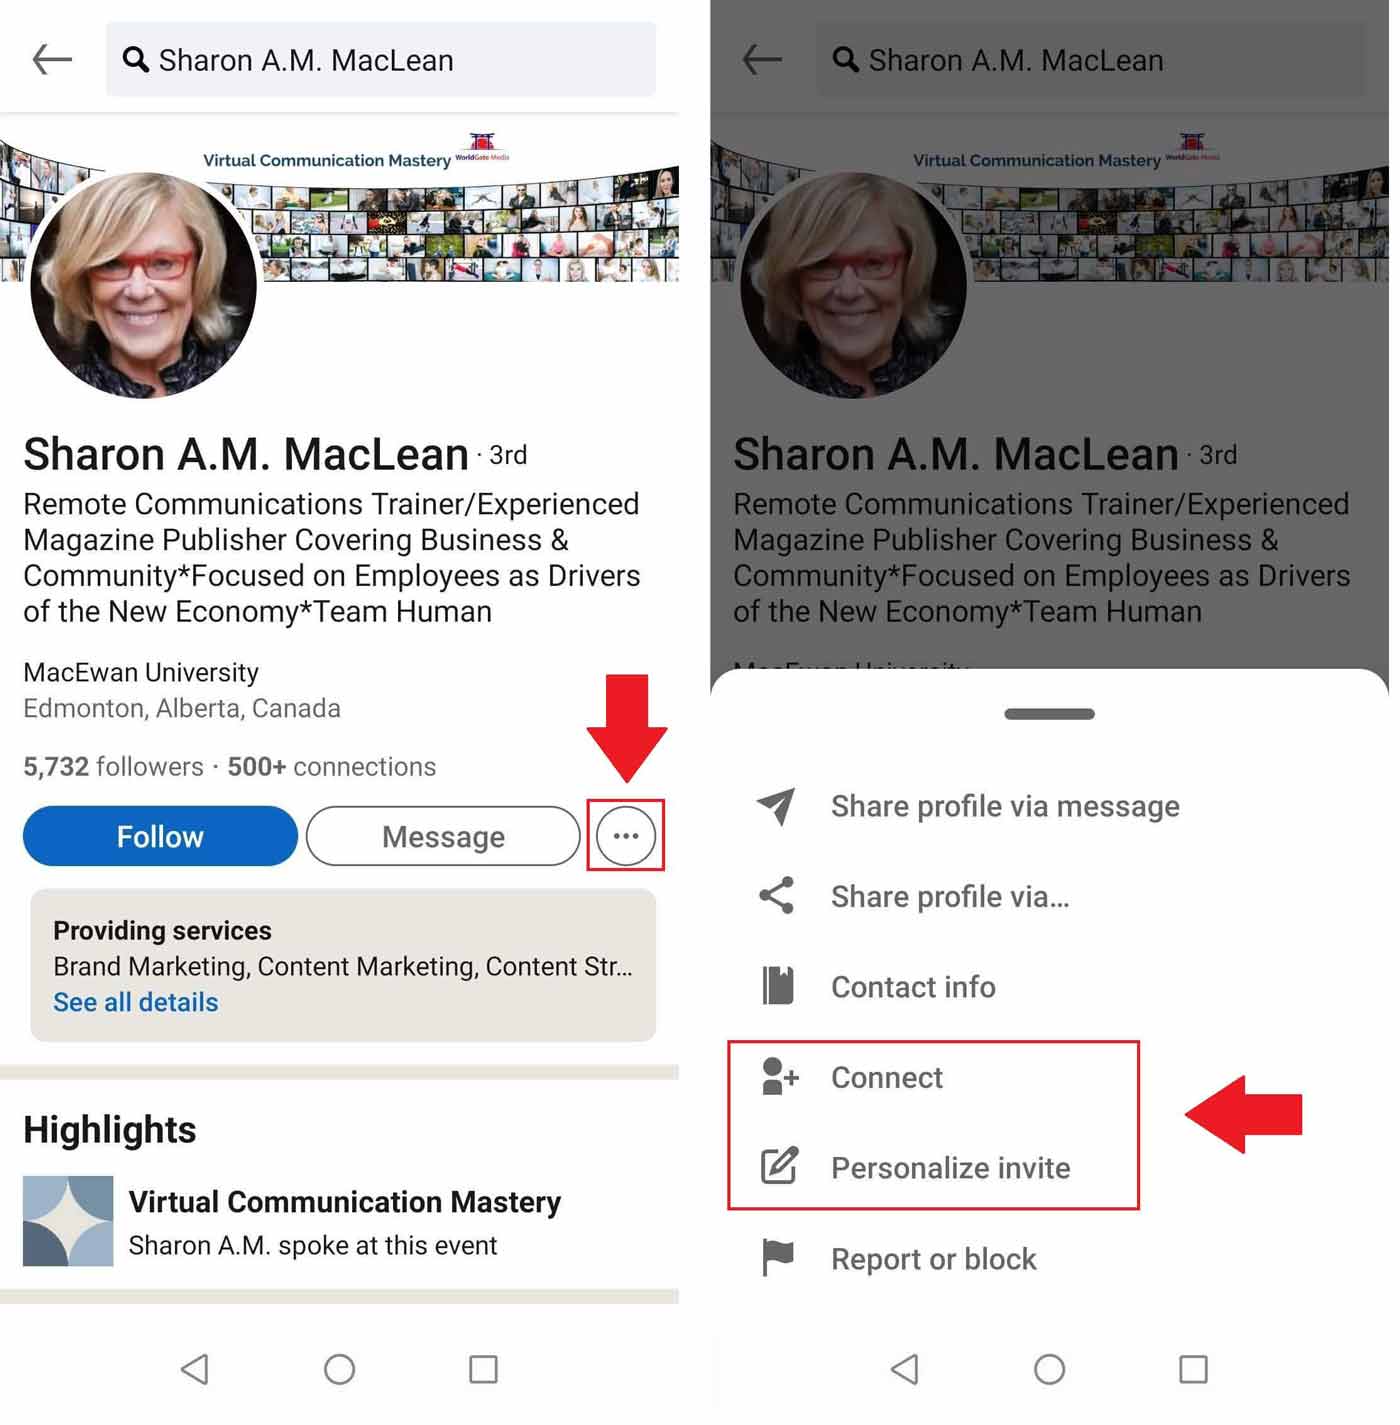 Image showing how to connect with someone on LinkedIn app when there is no immediately visible Connect button